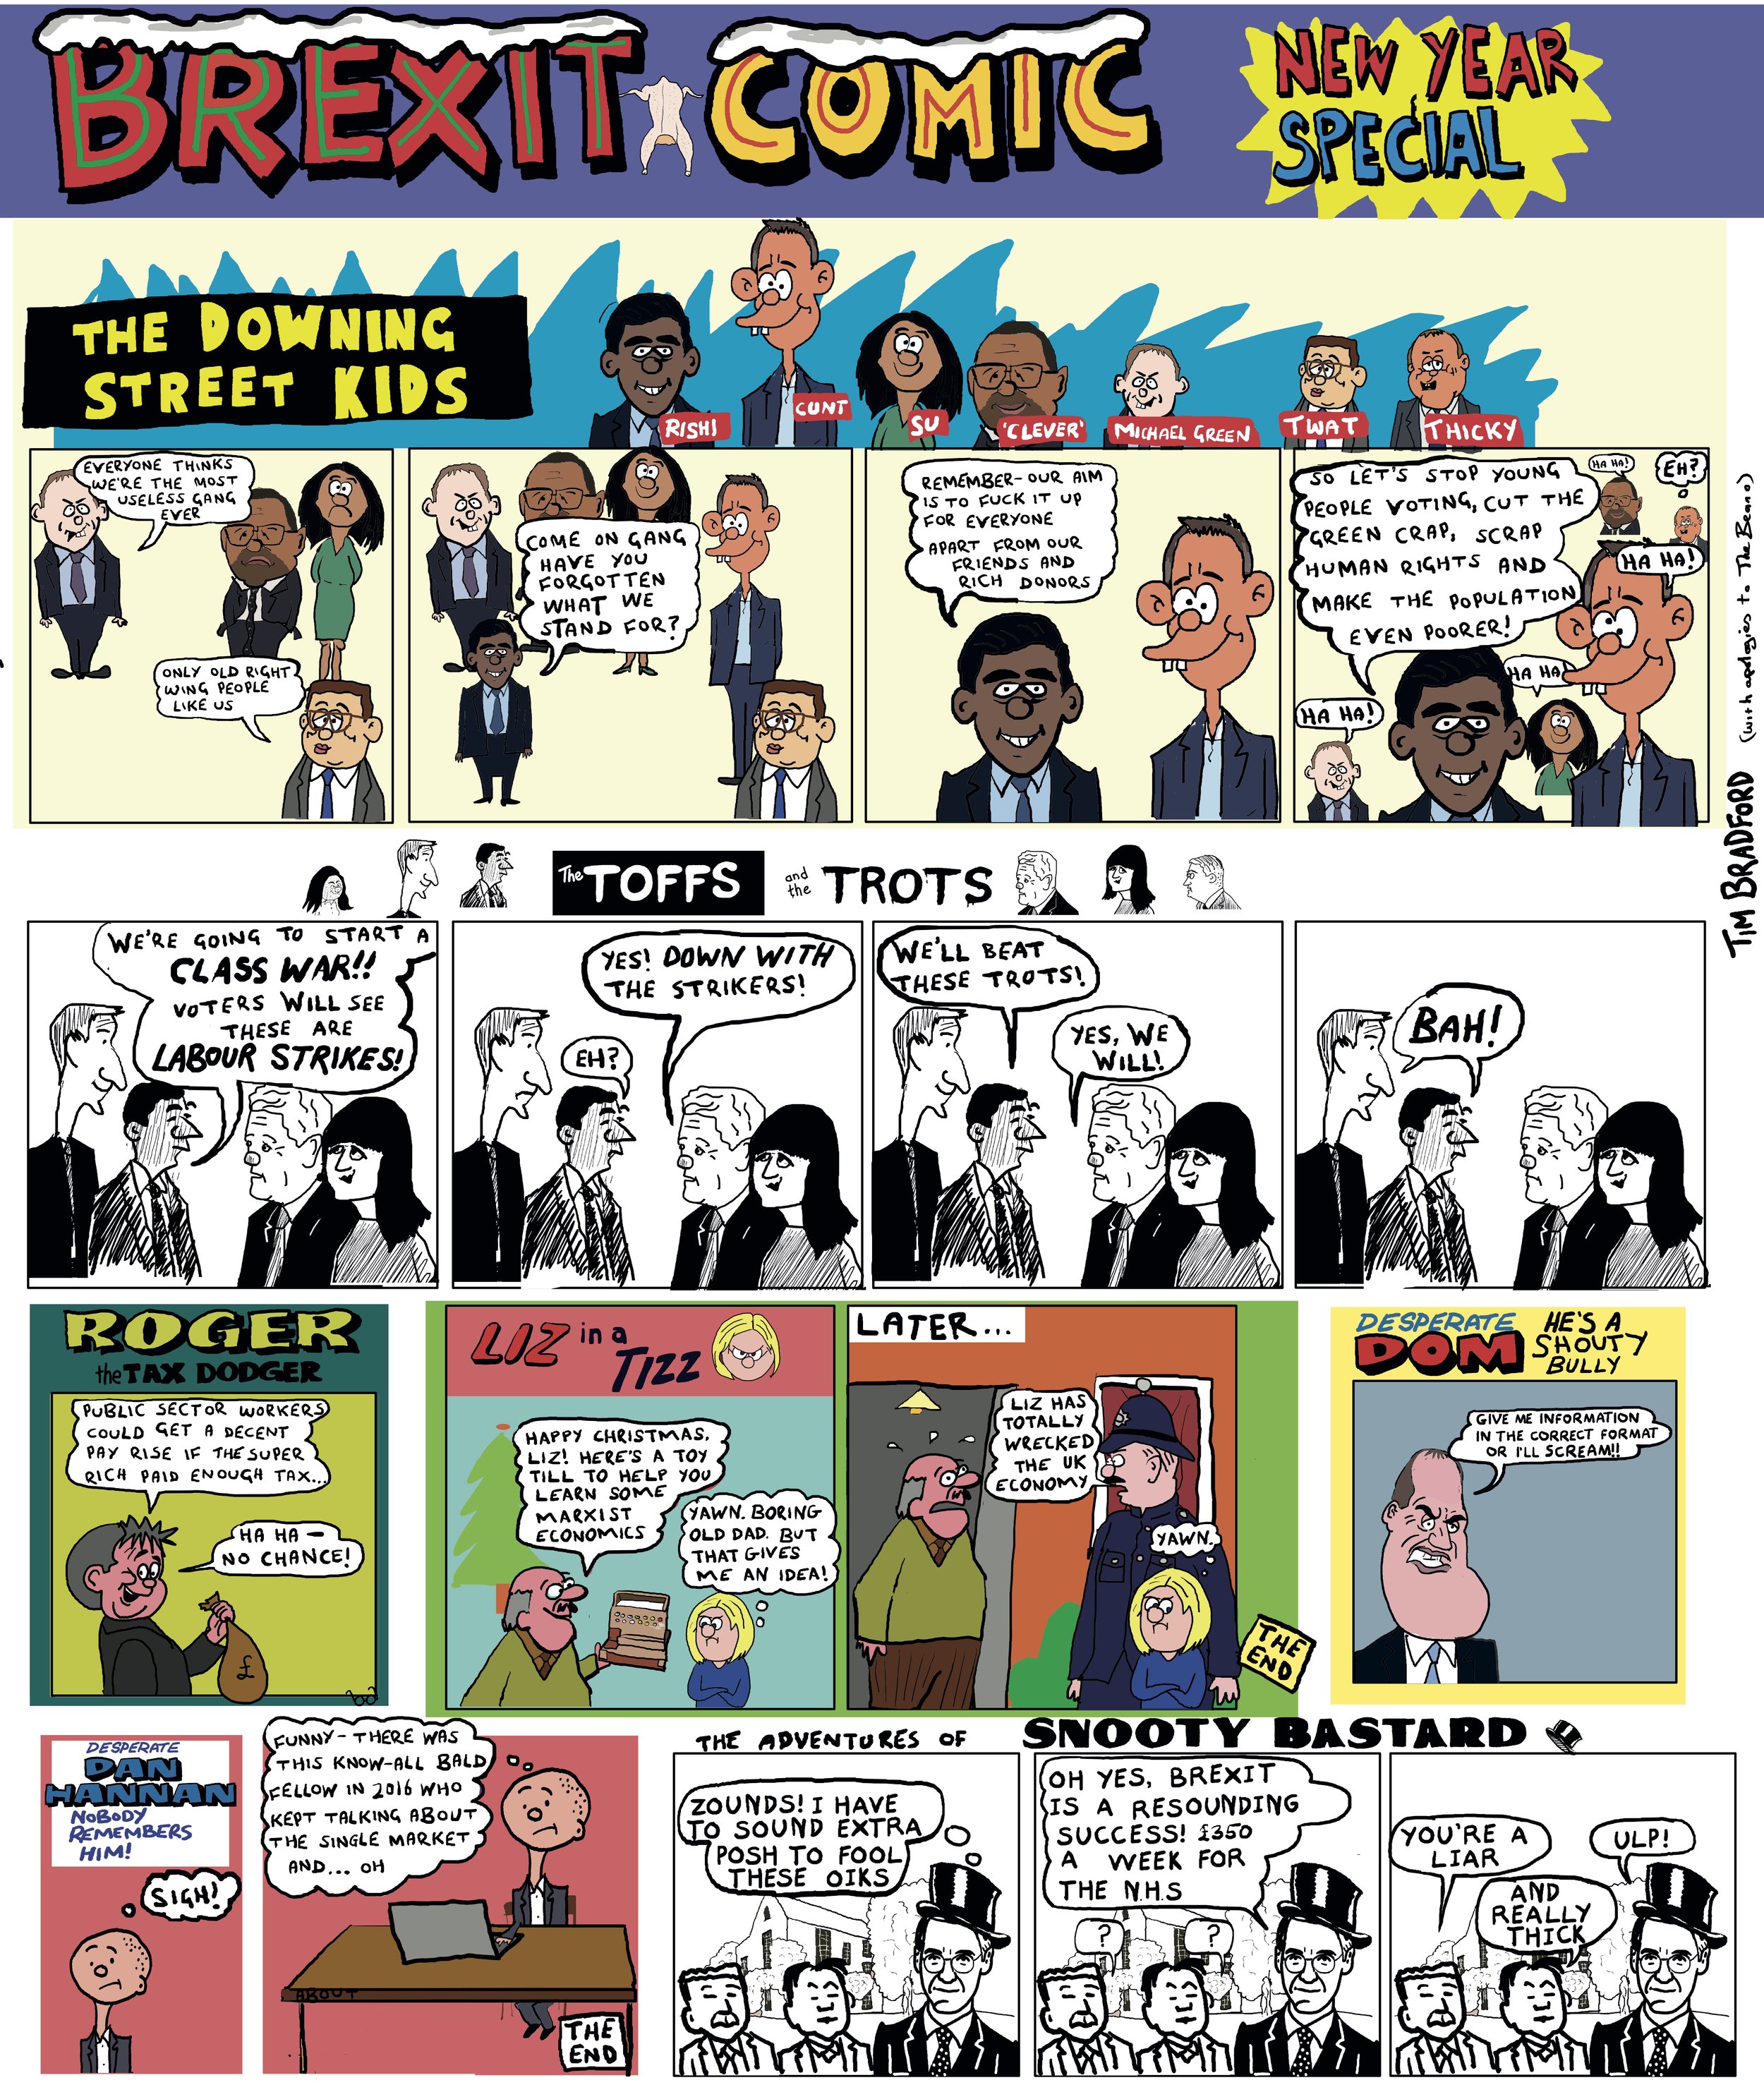 Brexit Comic (new year special) - 21/12/2022